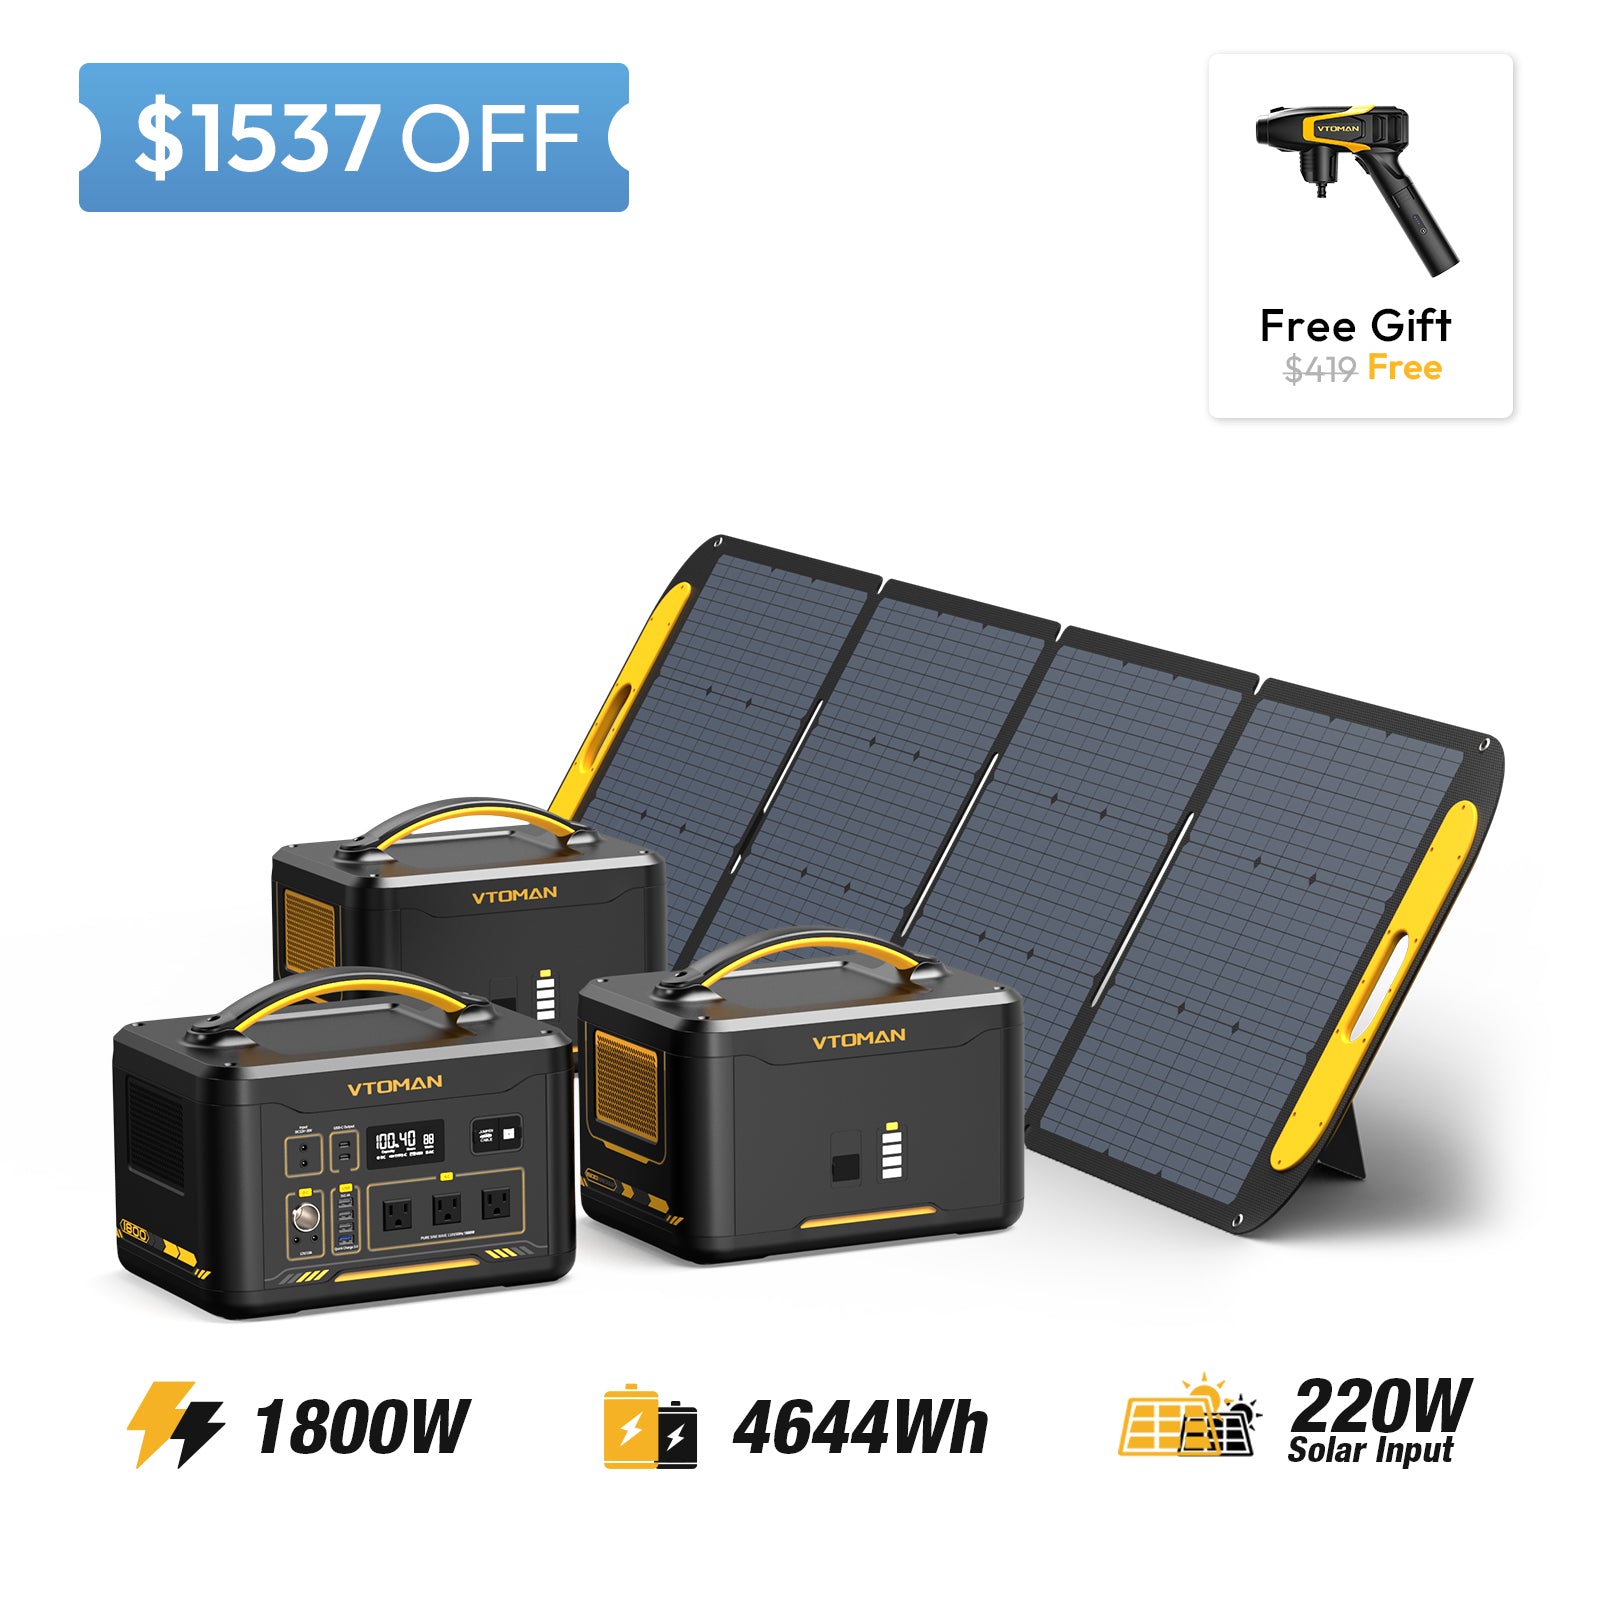 Jump 1800 and 2-1548wh extra battery and 220w solar panel save $1537 in summer sale